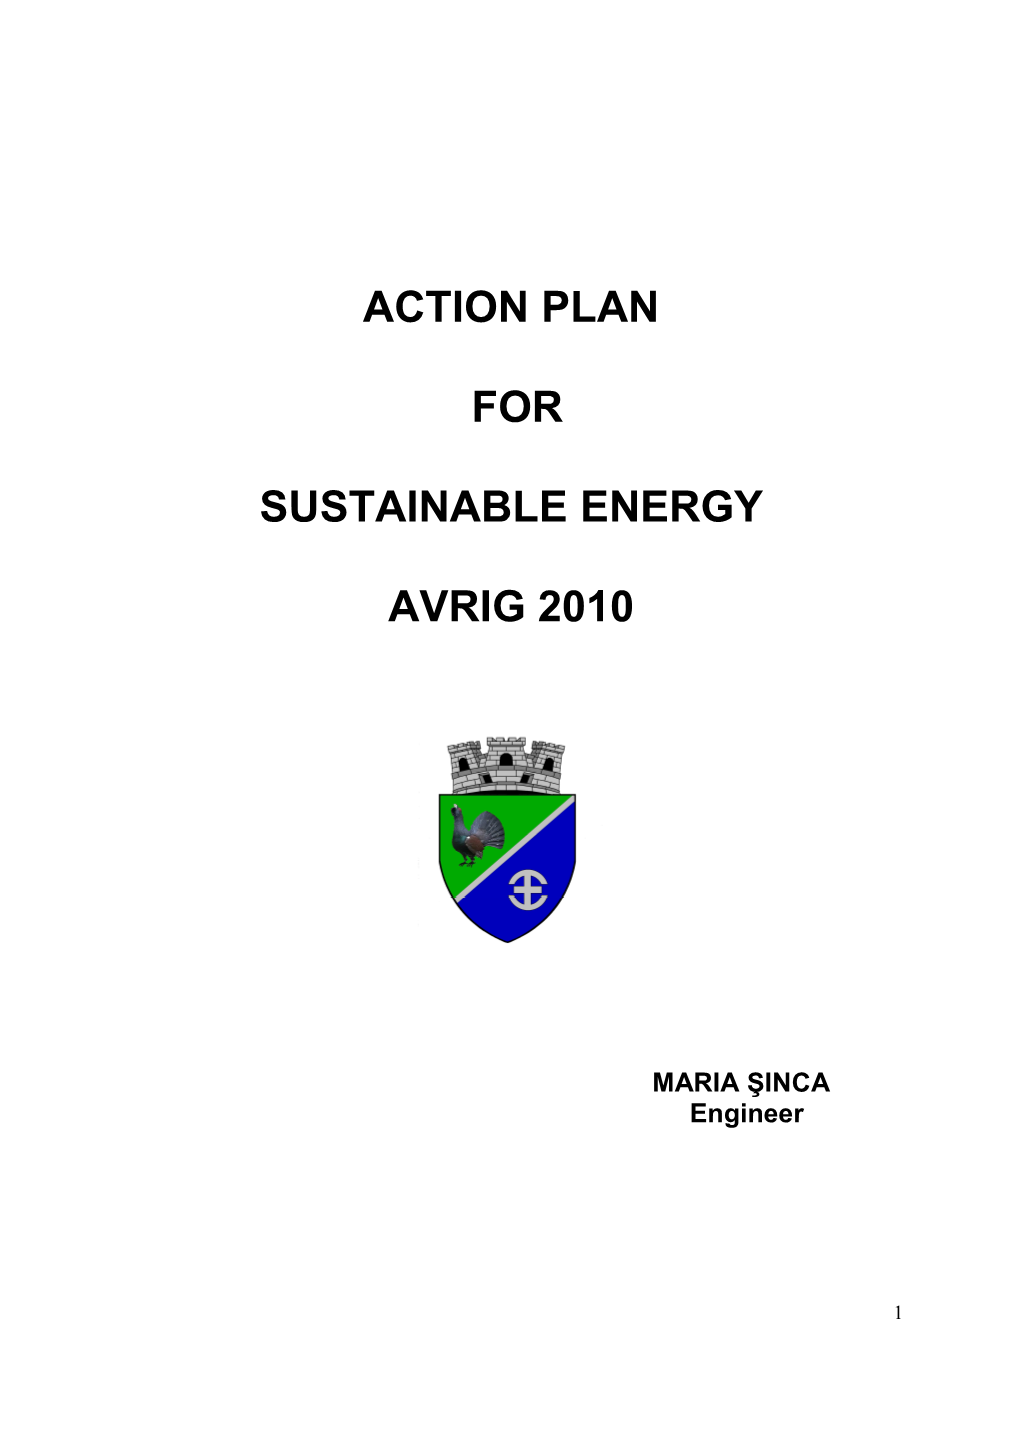 Action Plan for Sustainable Energy Avrig 2010